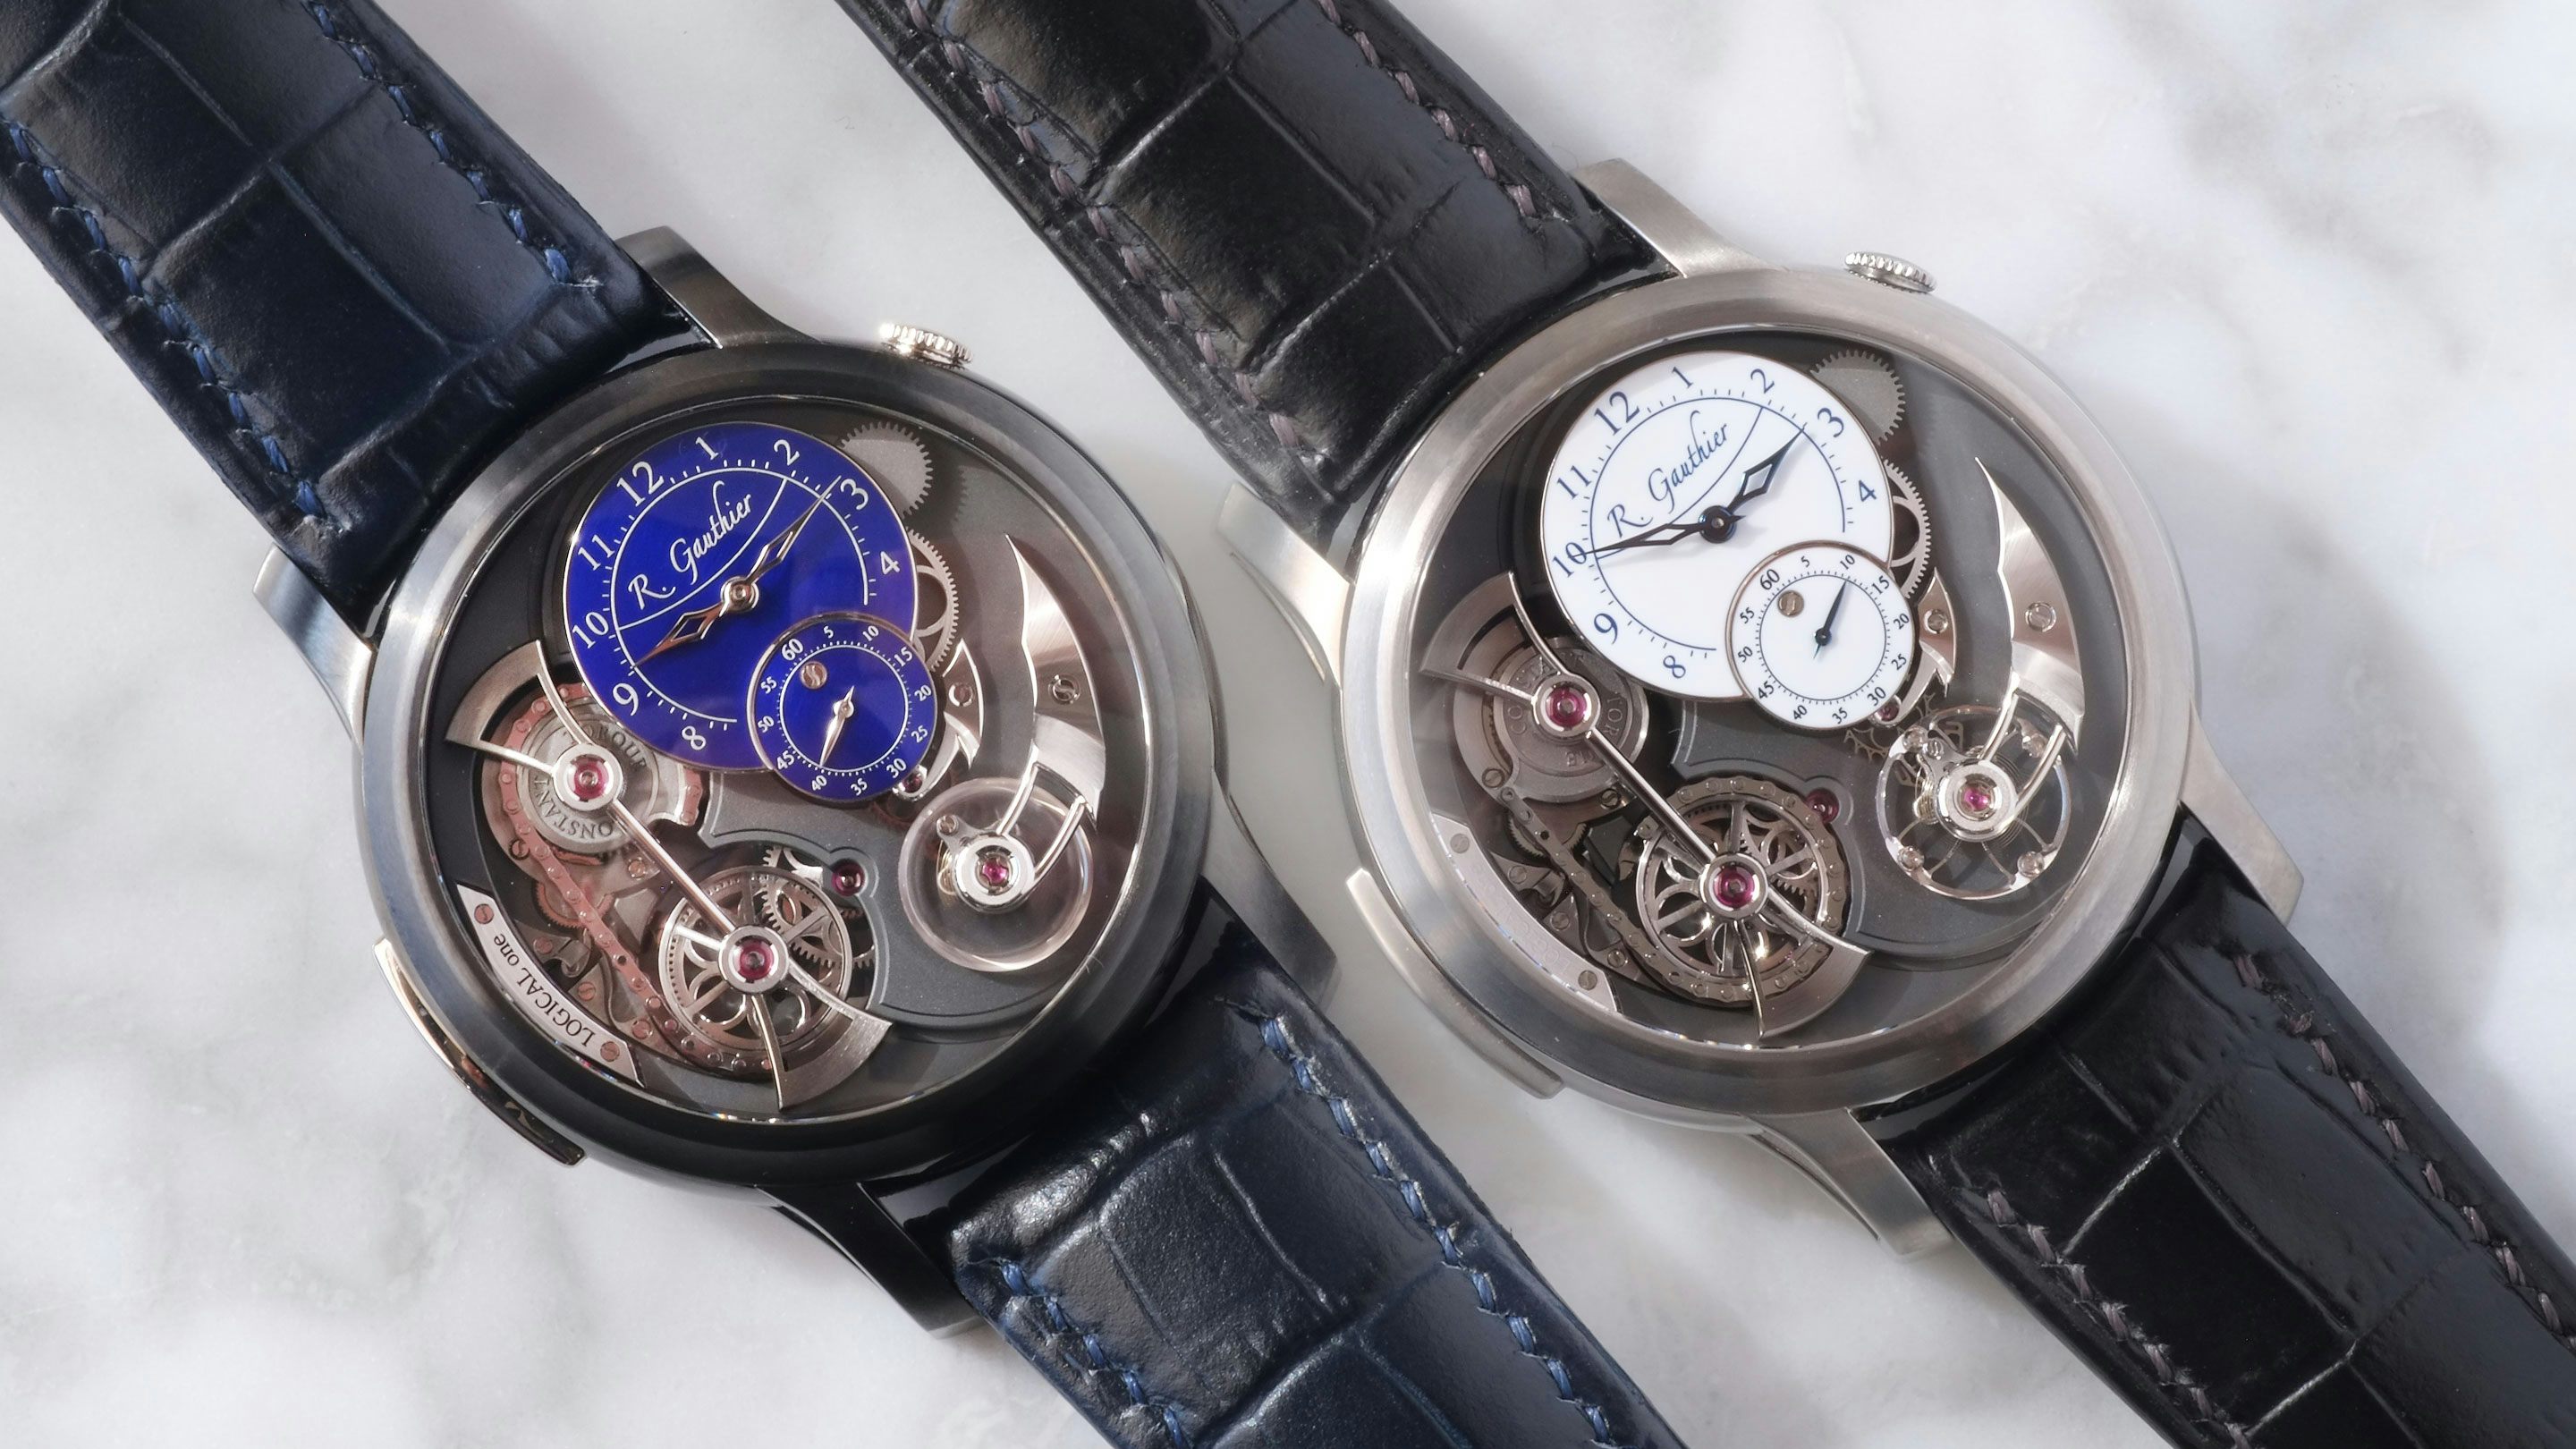 Hands-On With The New Chanel Monsieur Tourbillon Meteorite